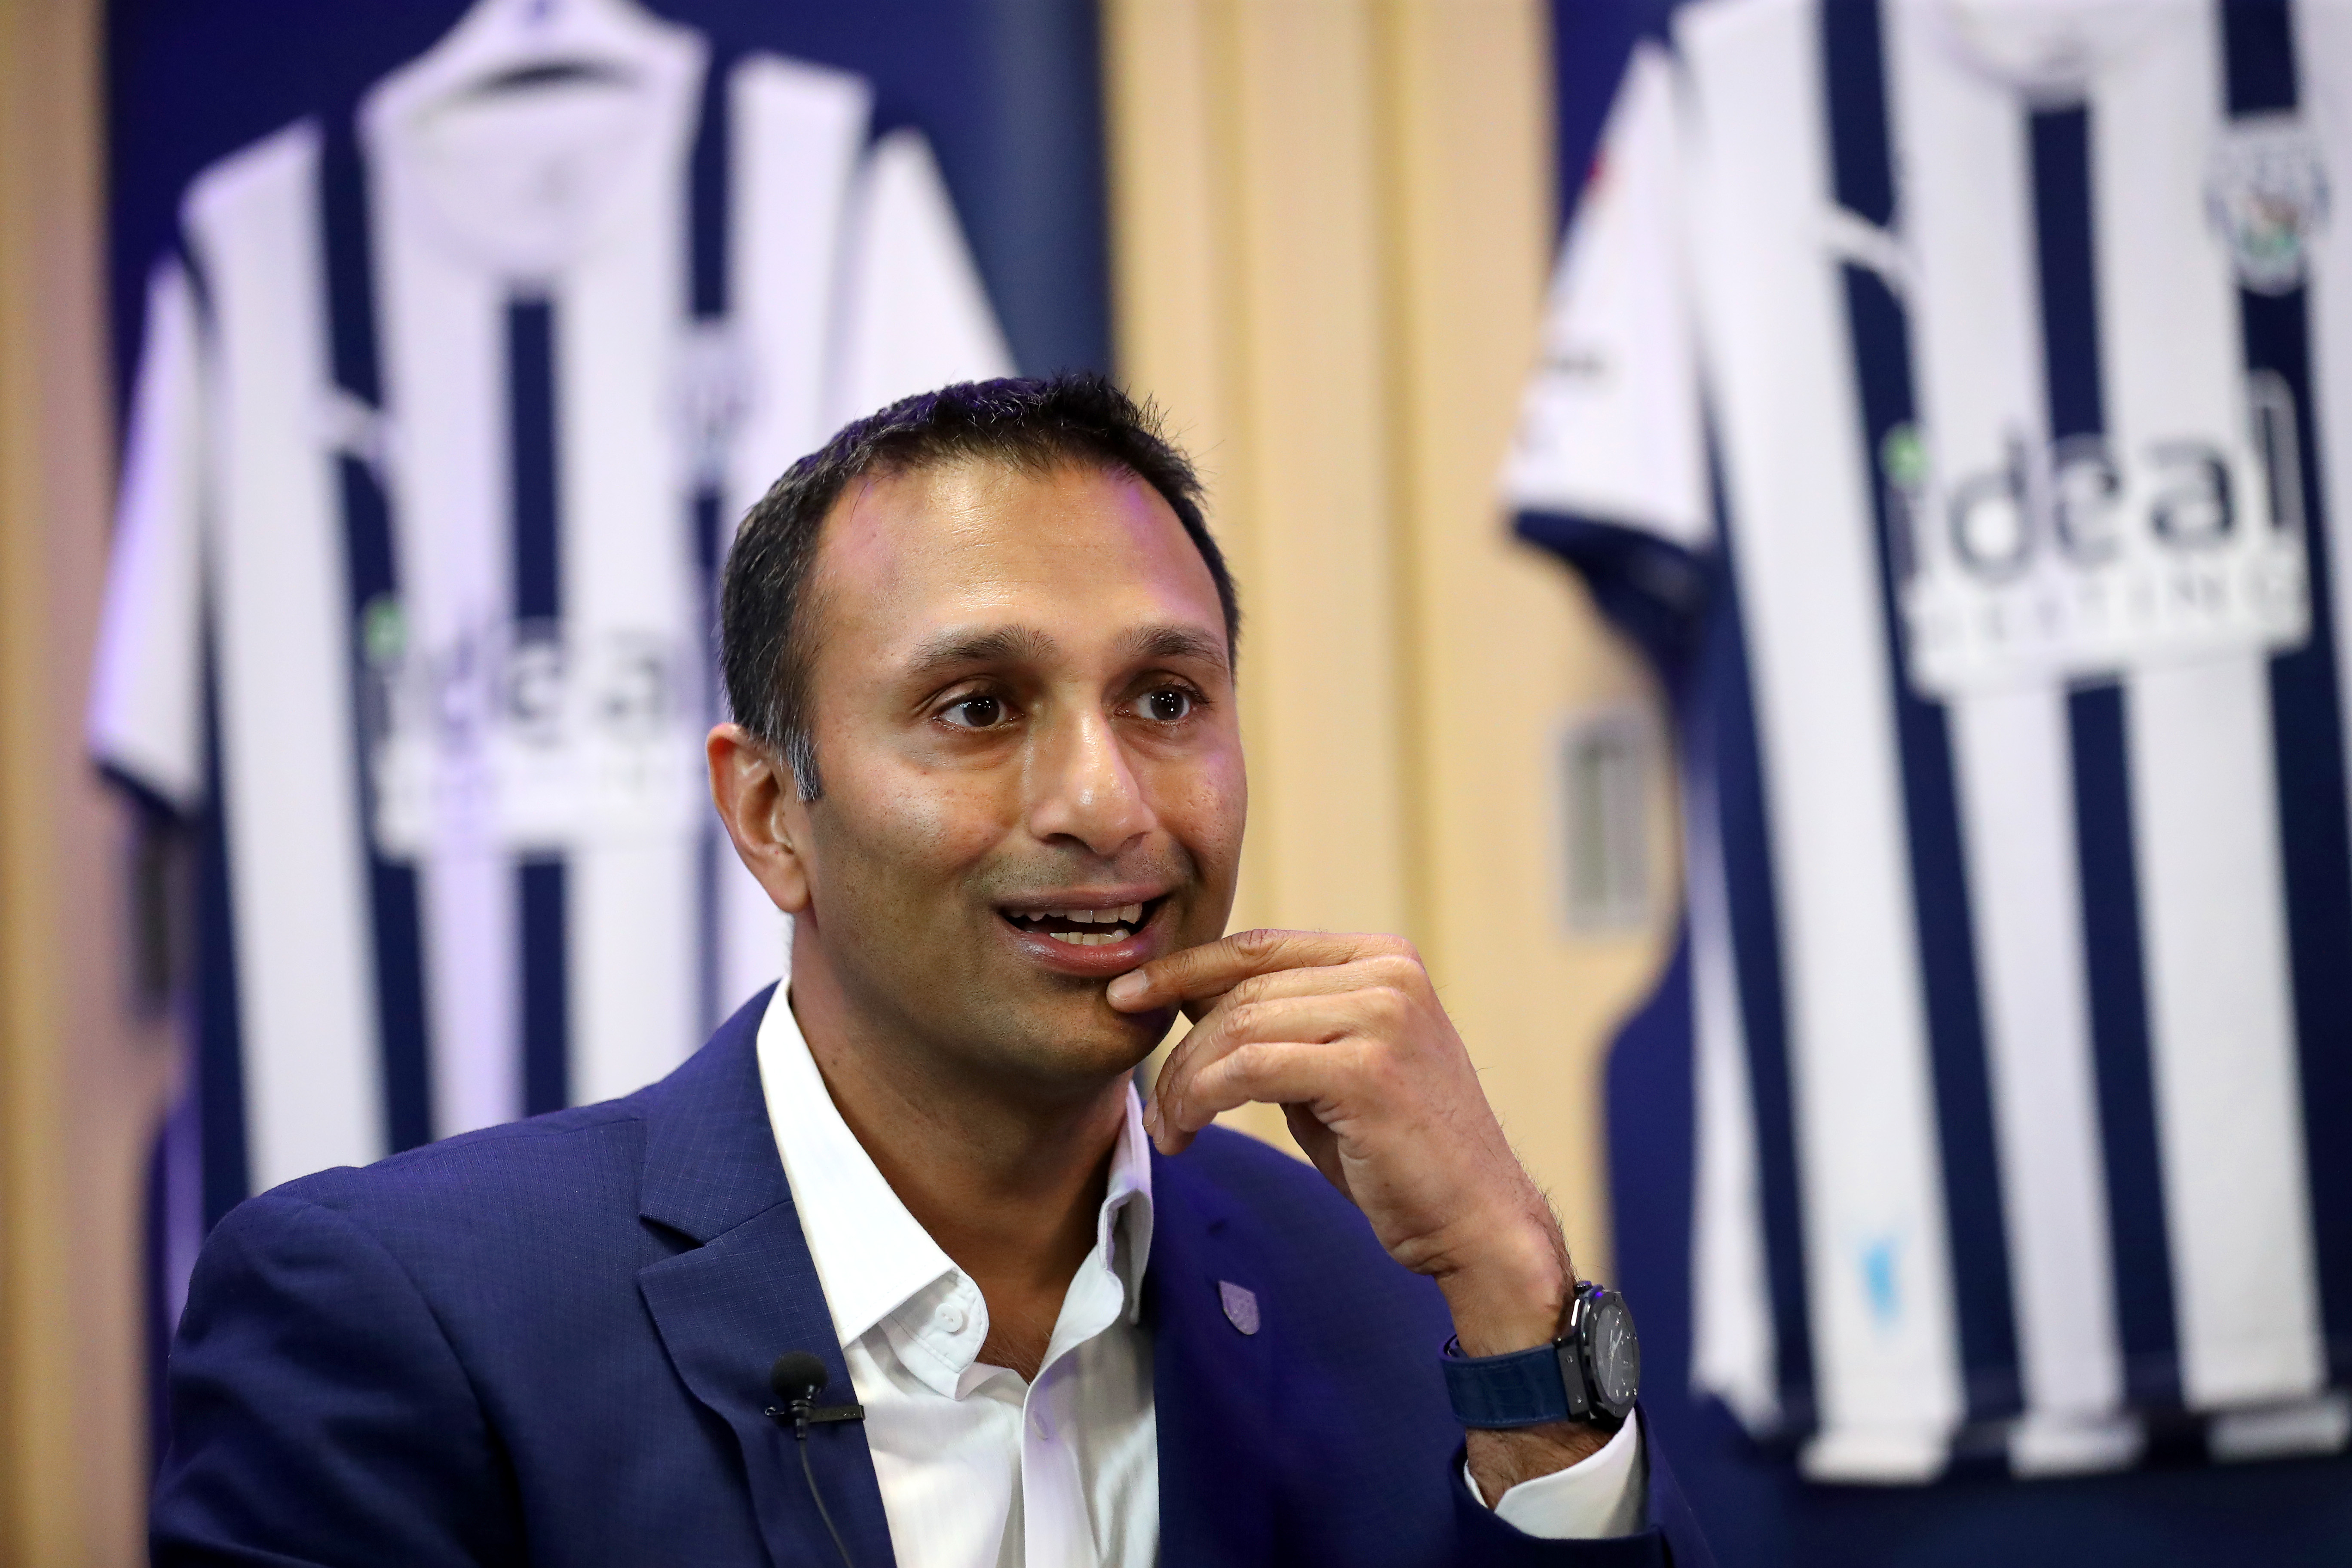 Shilen Patel is interviewed by WBA TV in the home dressing room with Albion shirts hanging behind him